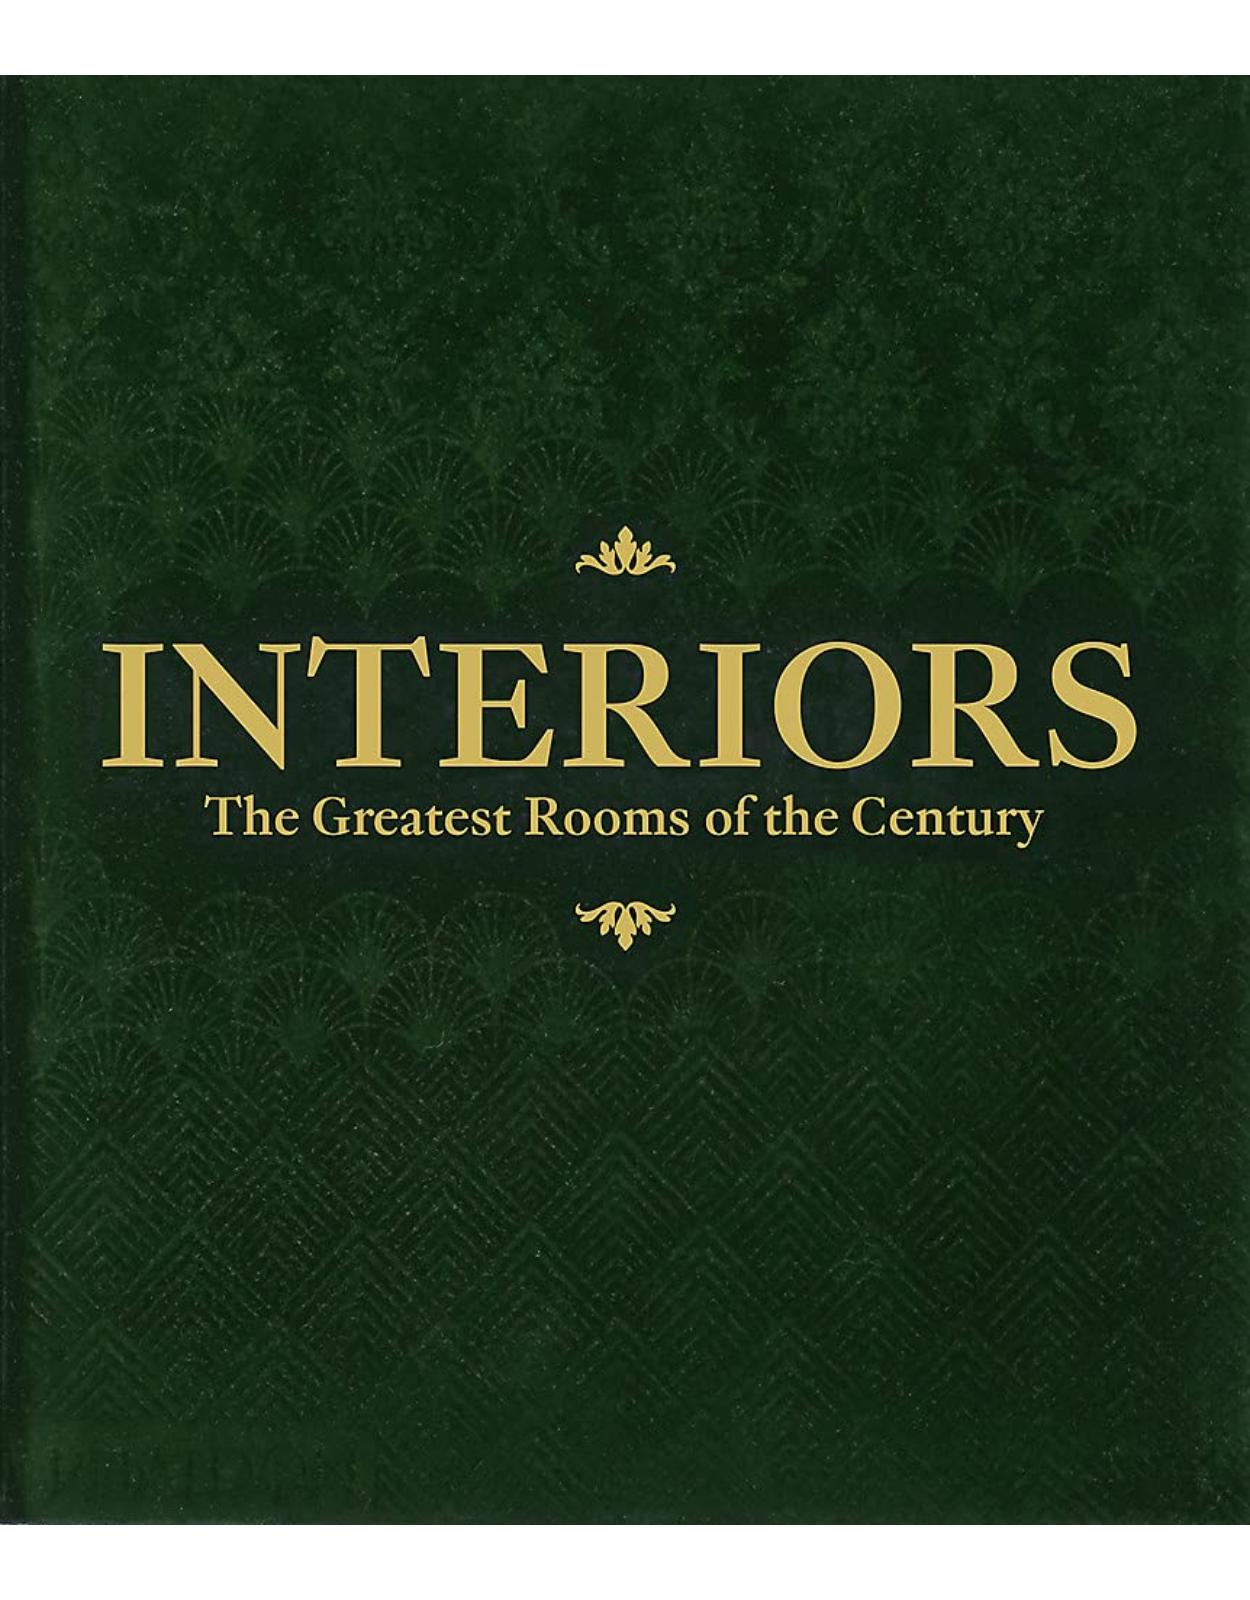 Interiors (Green Edition): The Greatest Rooms of the Century